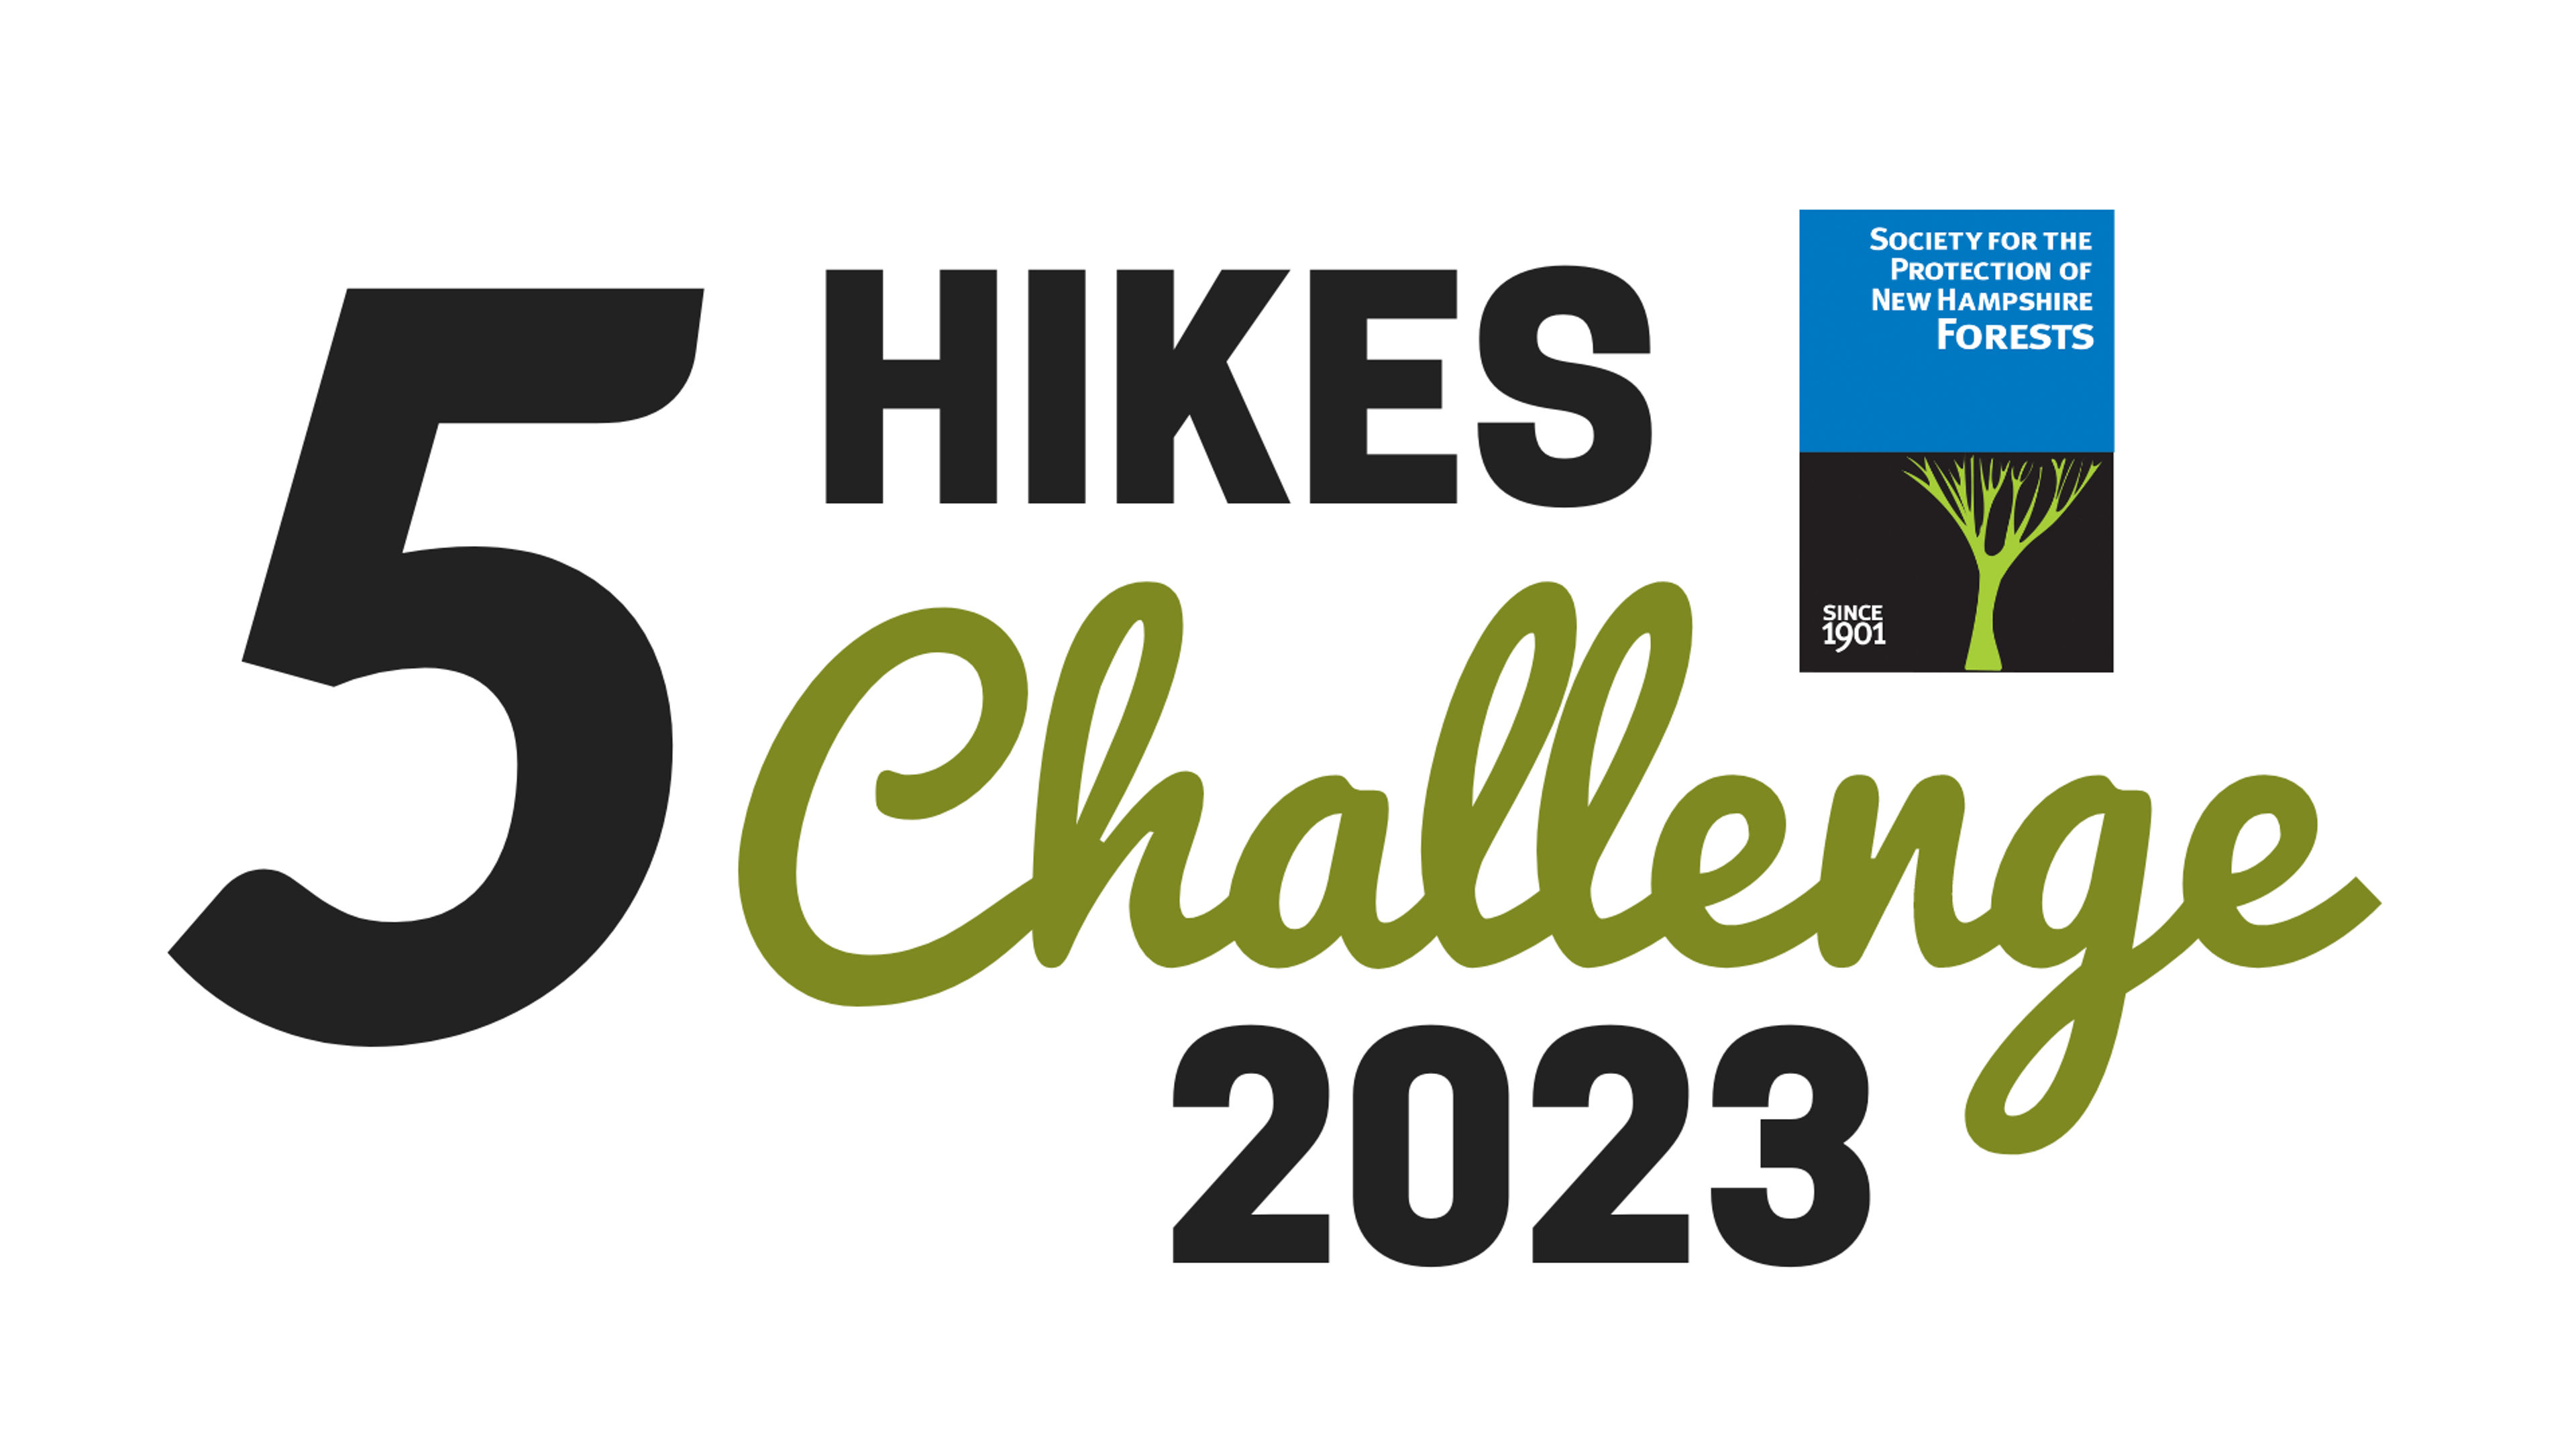 The logo for 5 Hikes Challenge 2023 with the logo of the Forest Society inside it.